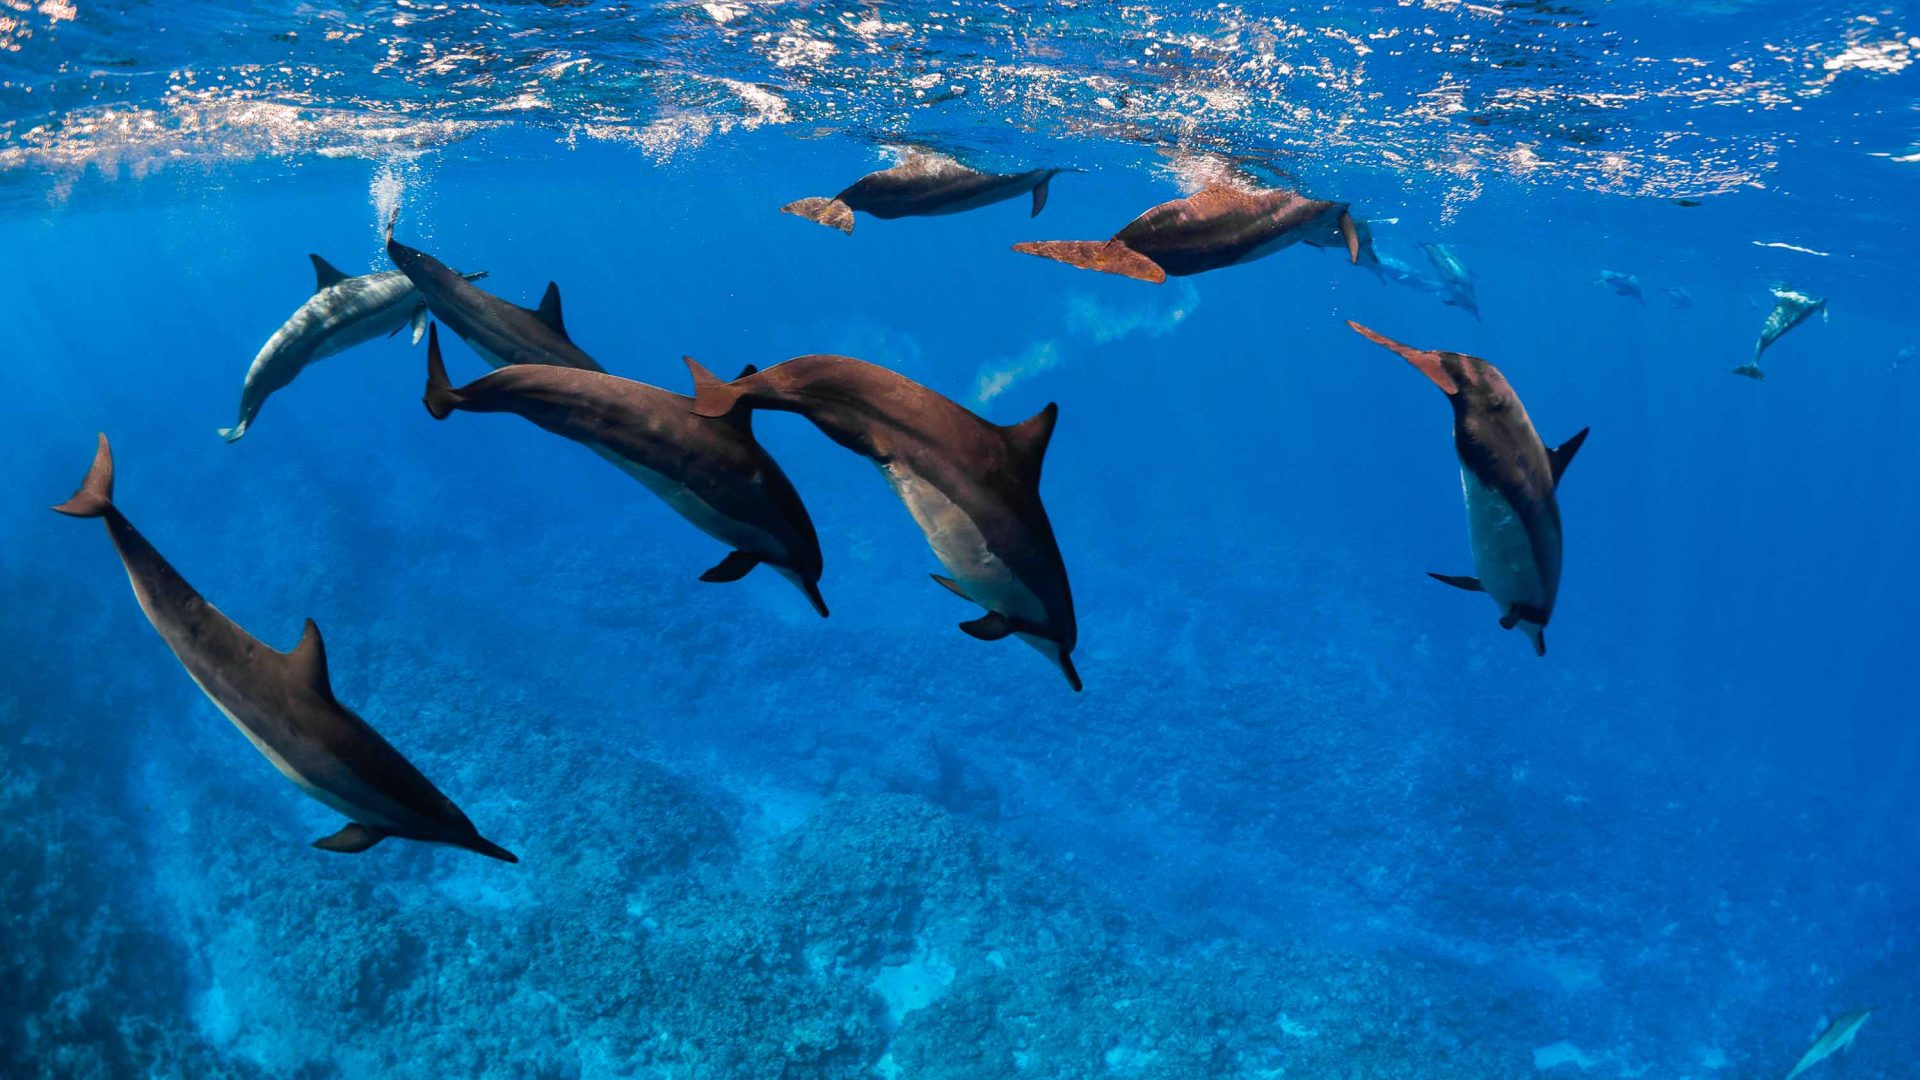 Resident spinner dolphins swim in the blue sea.